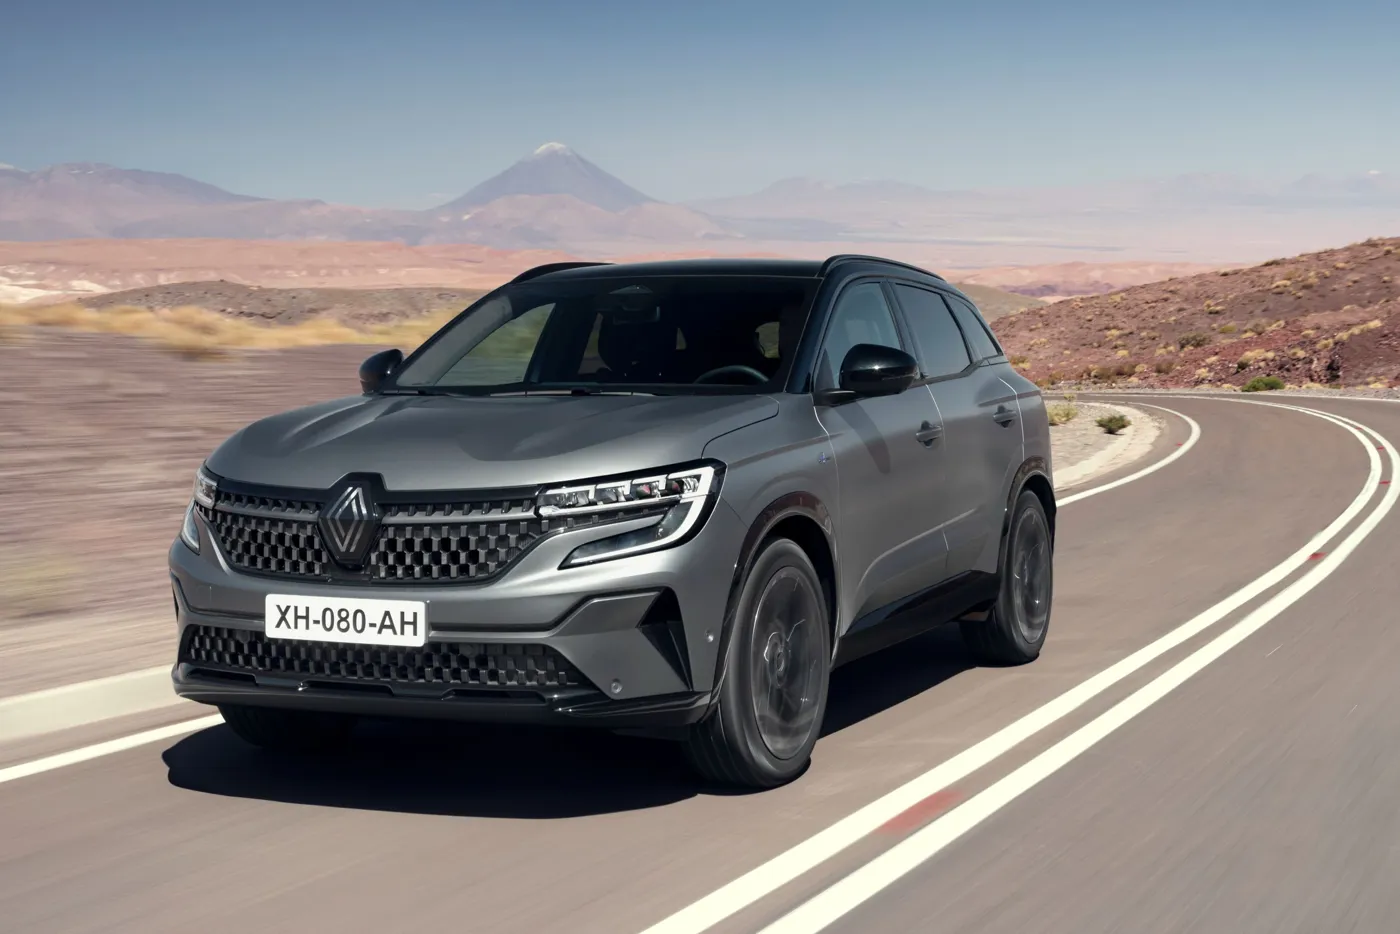 Renault Austral E-Tech: prices, specs and CO2 emissions